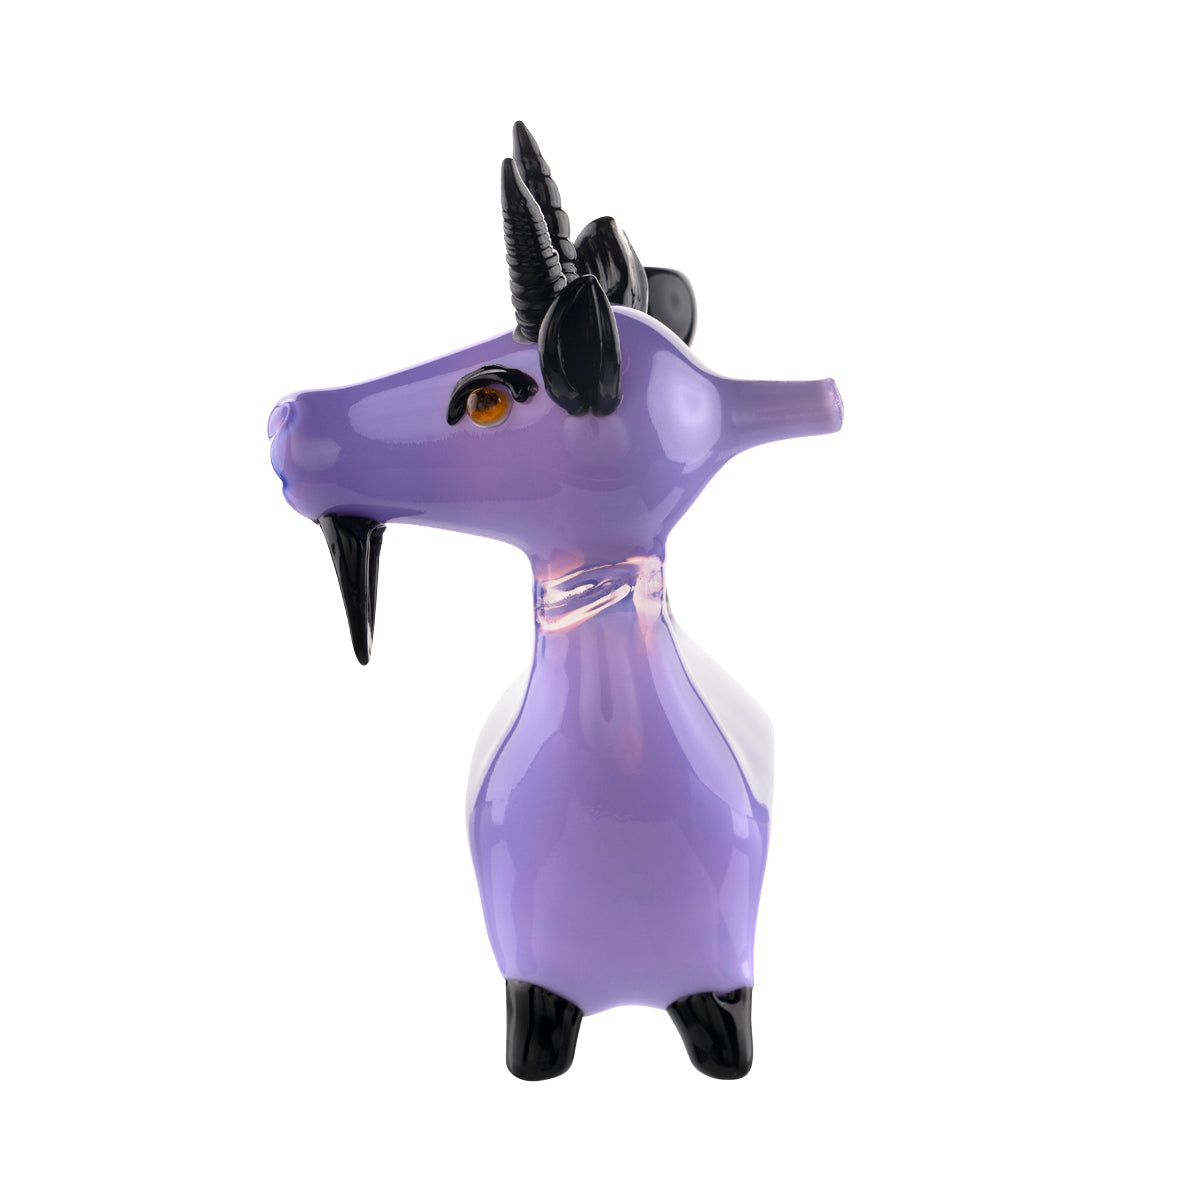 Goat Glass Water Pipe | 5" - Glass - Slyme Purple and Black | Novelty  Biohazard Inc   